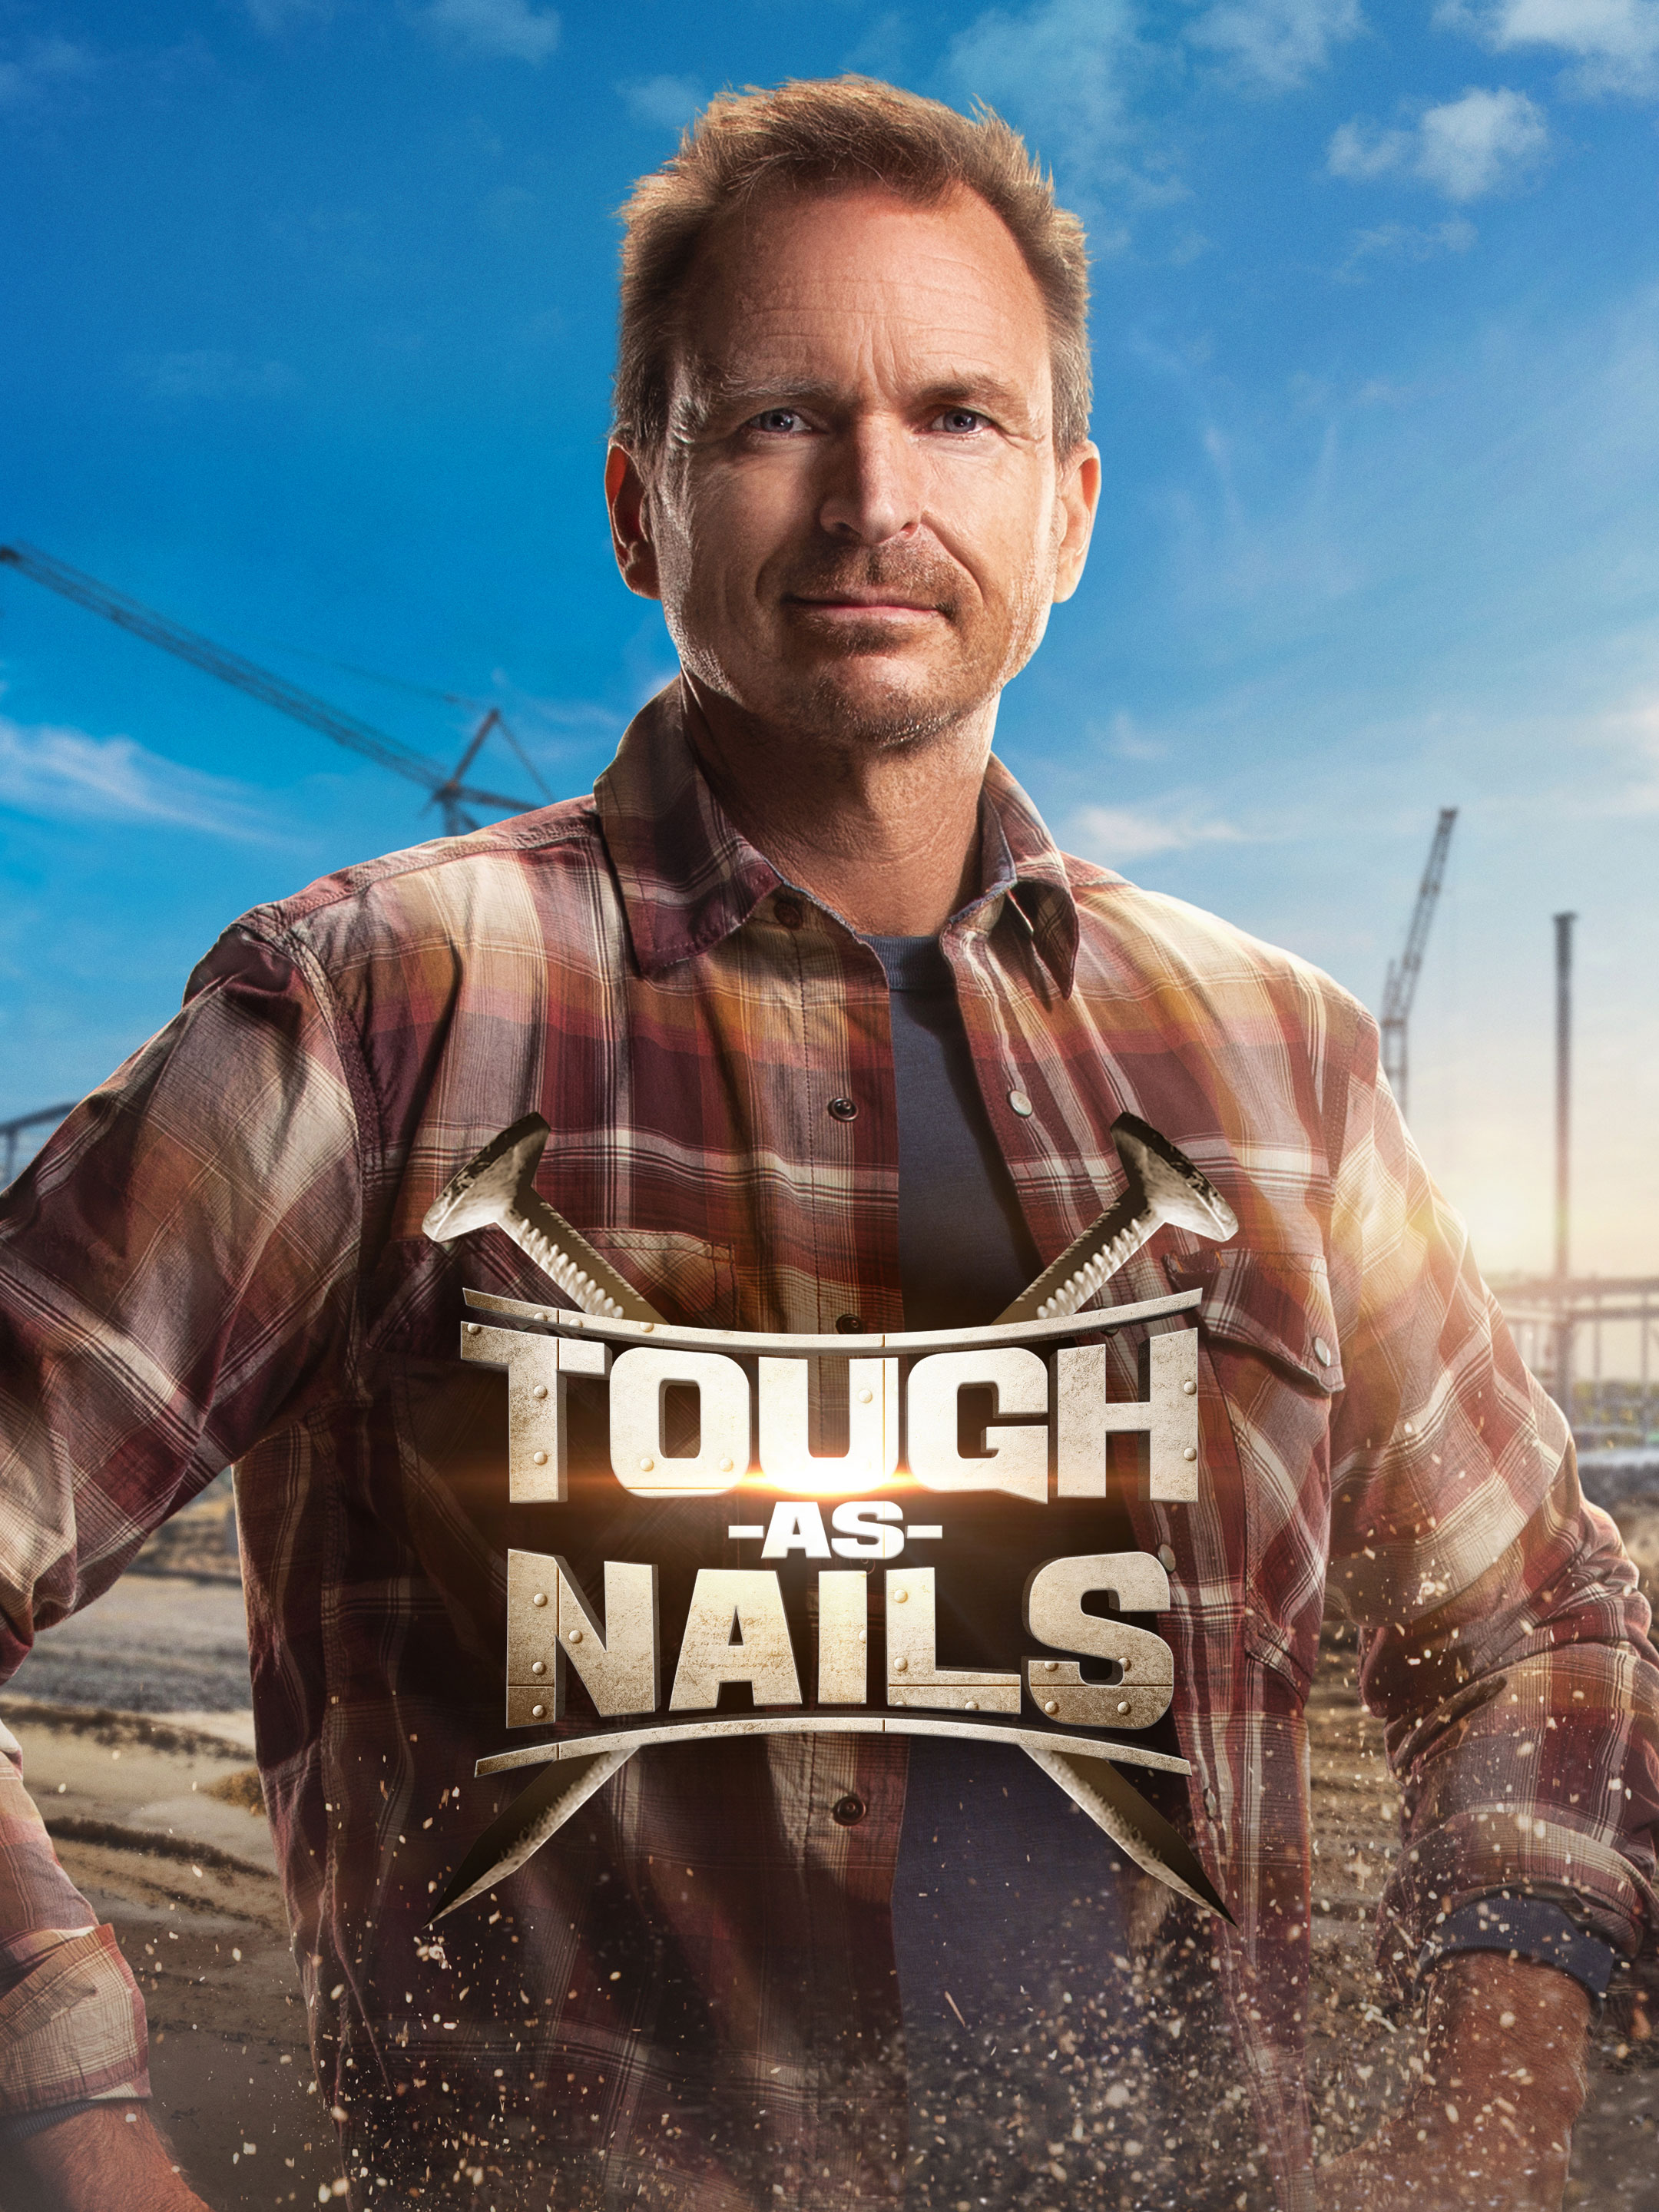 5 WAYS TO BECOME TOUGH AS NAILS by boss6787 - Issuu